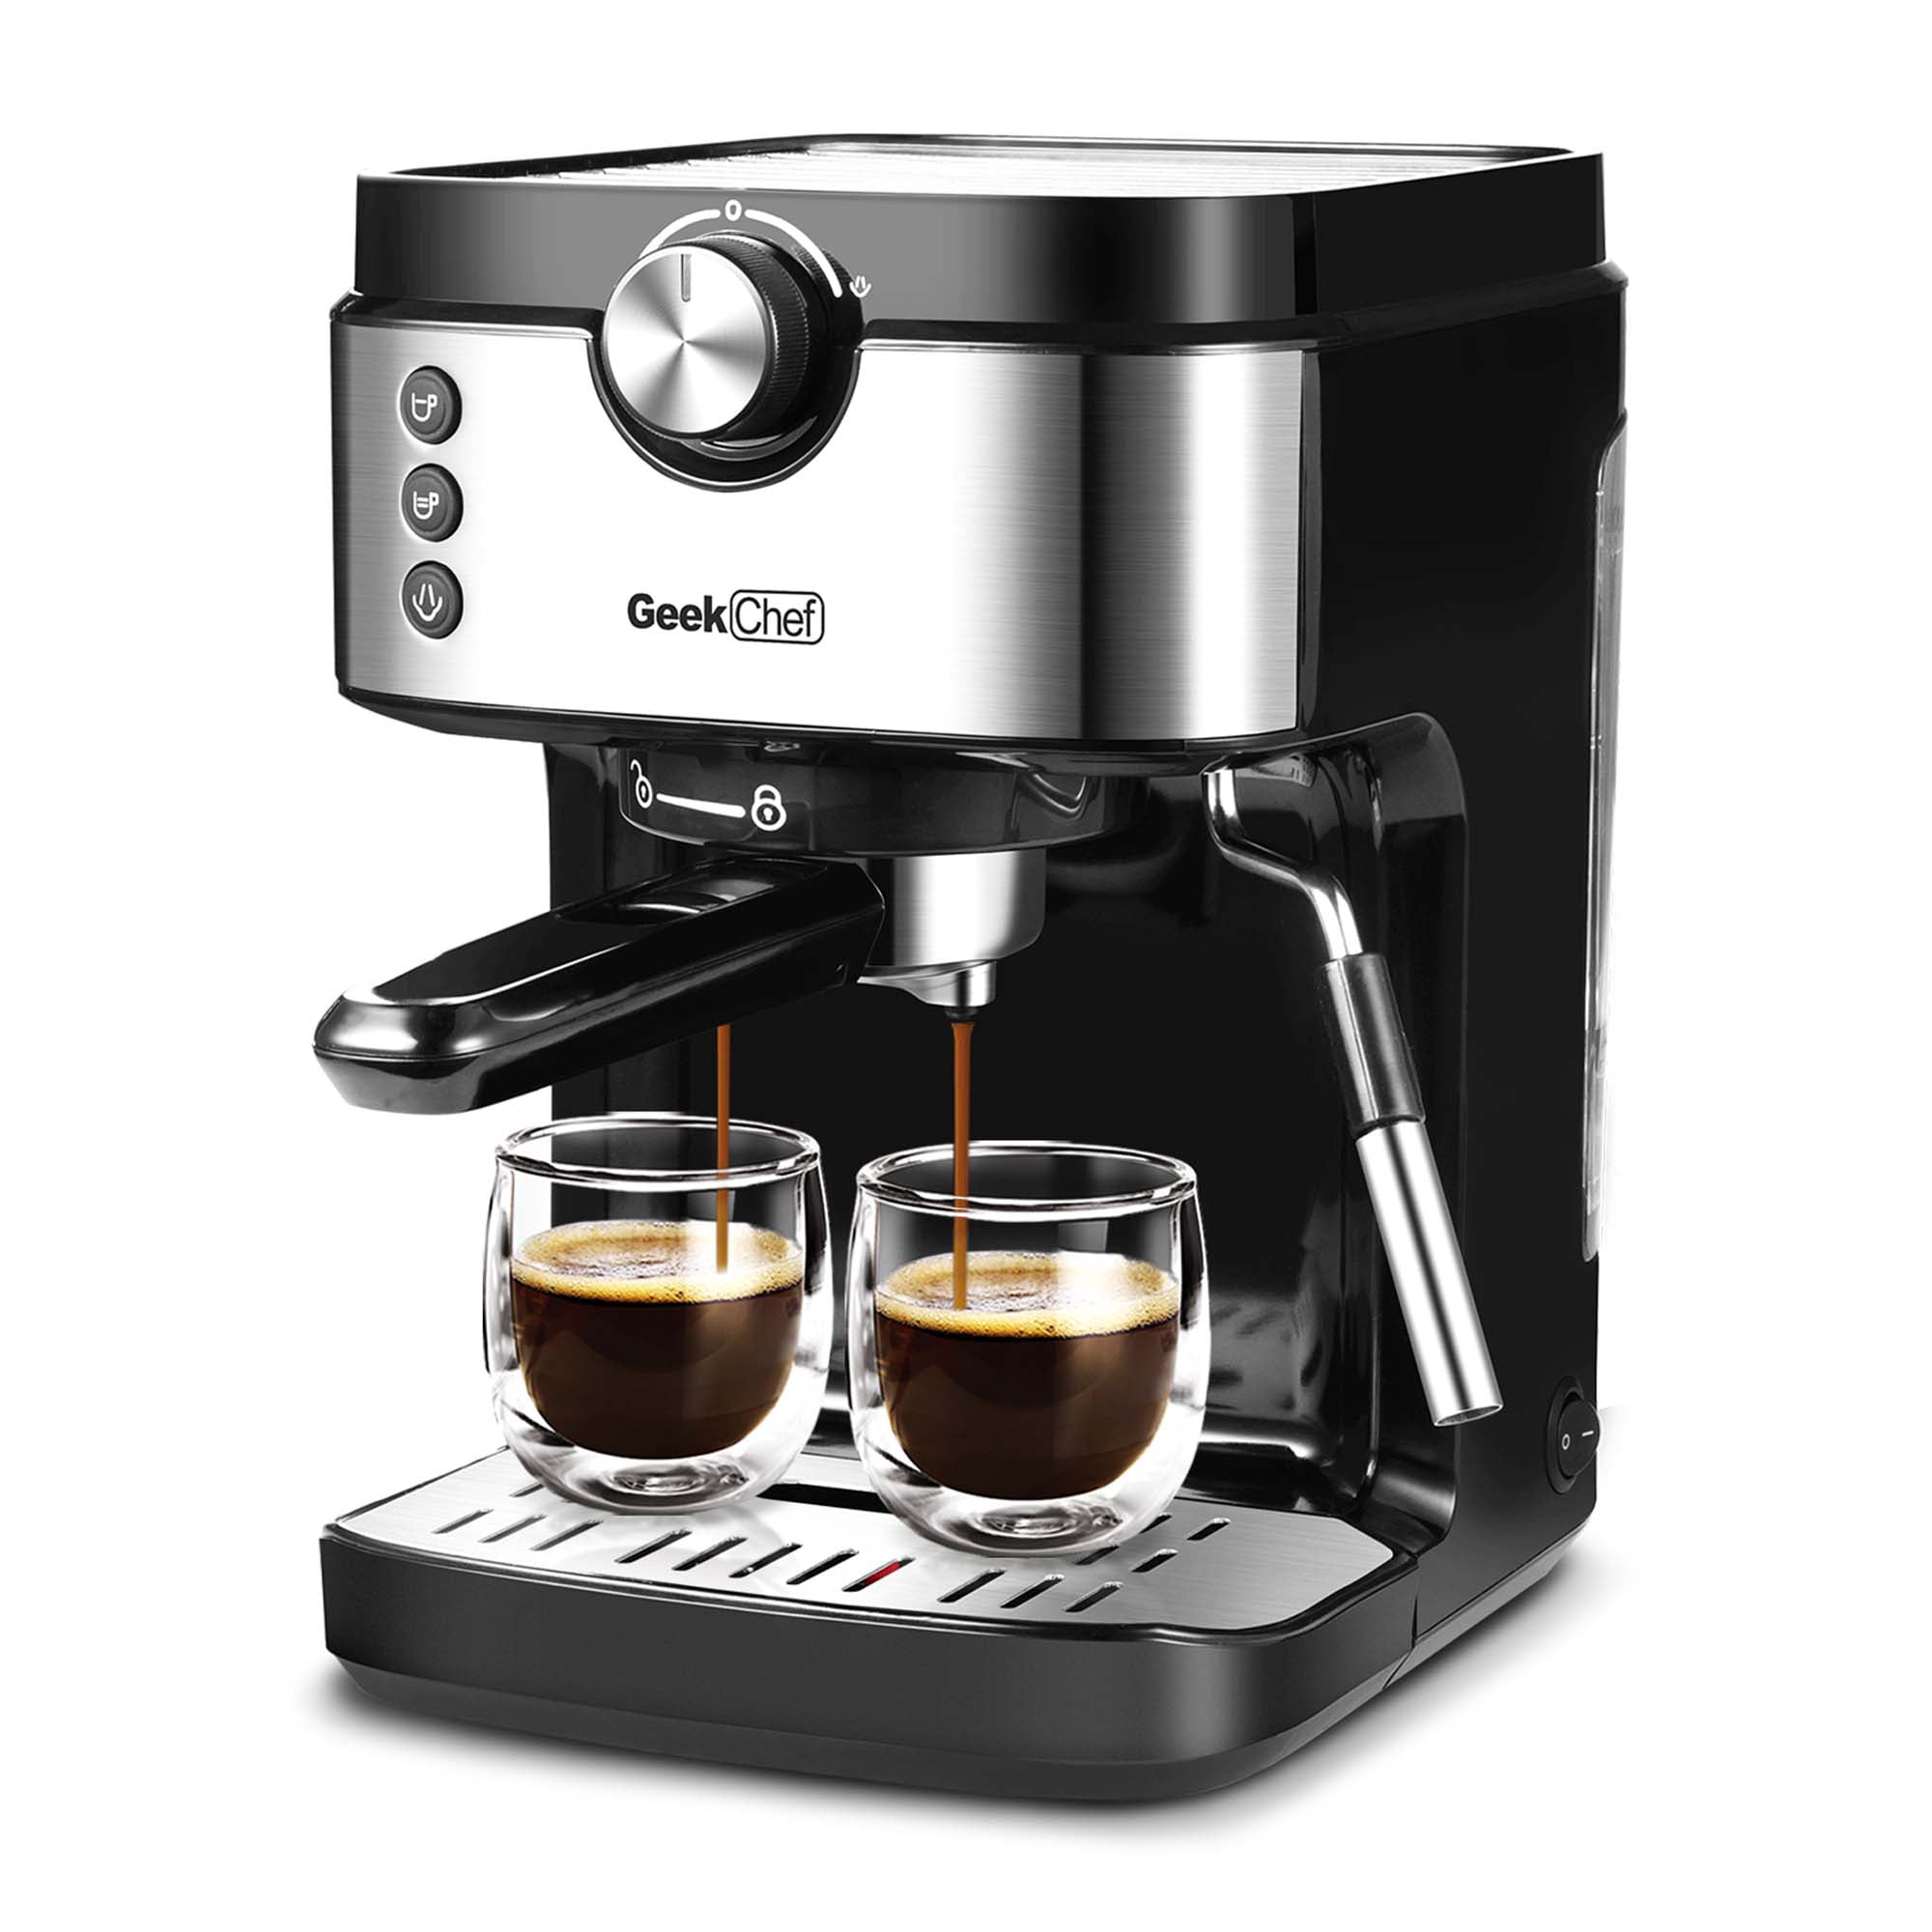 Professional Pump Espresso Coffee Machine Espresso Machine Coffee Maker with Milk Frothing Arm for Home and Office Black 